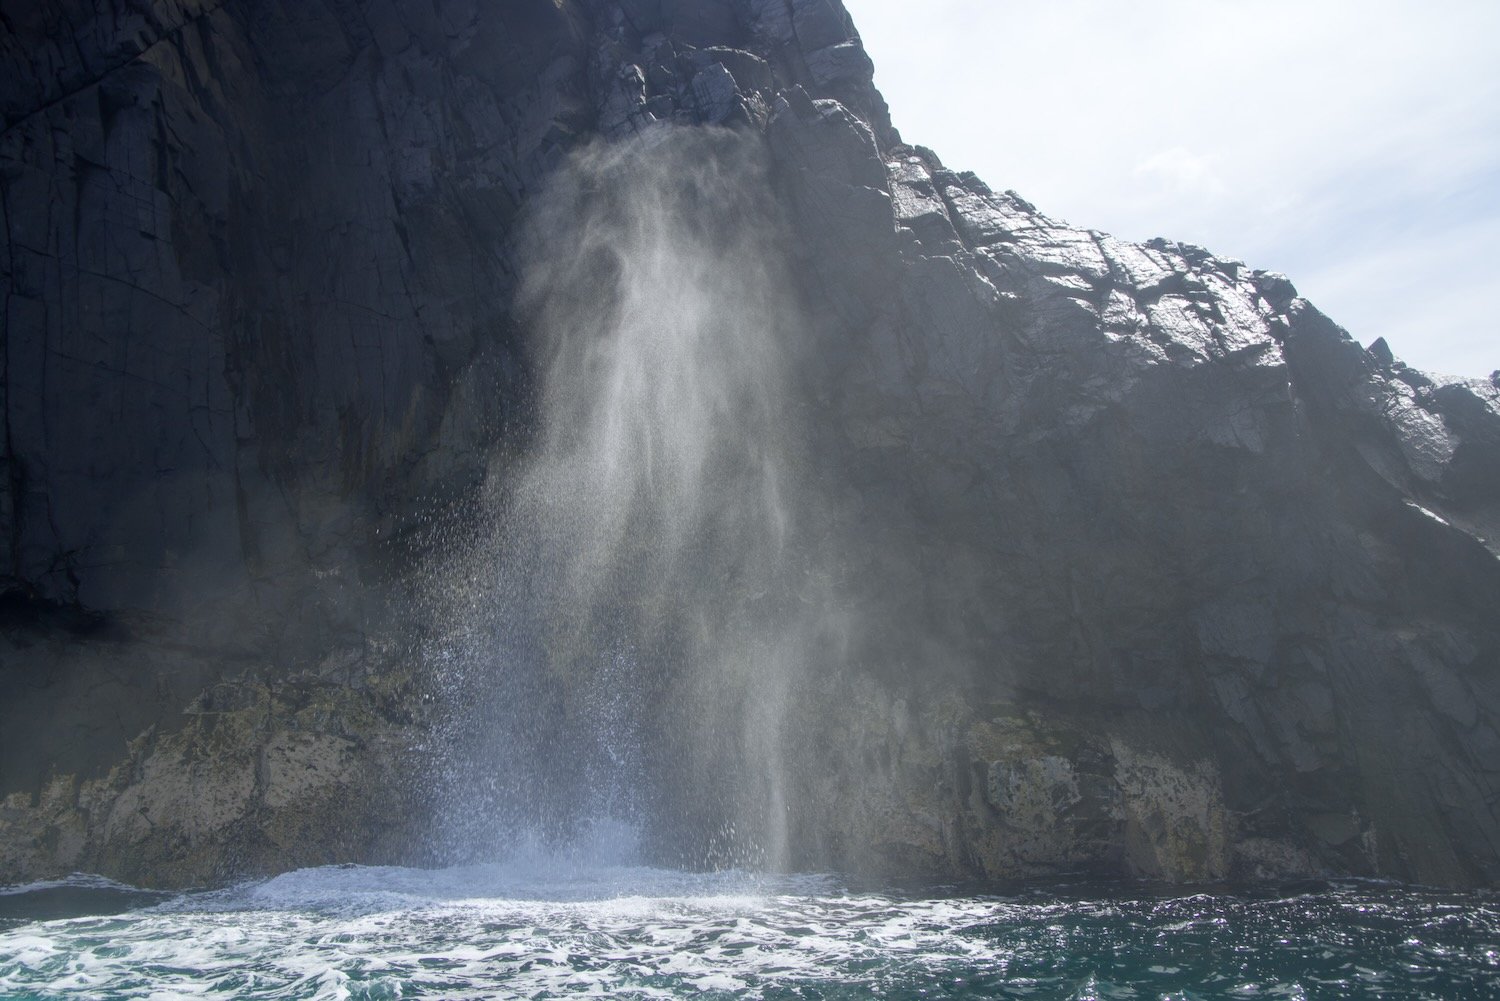 A blow hole: where the water is forced up by waves